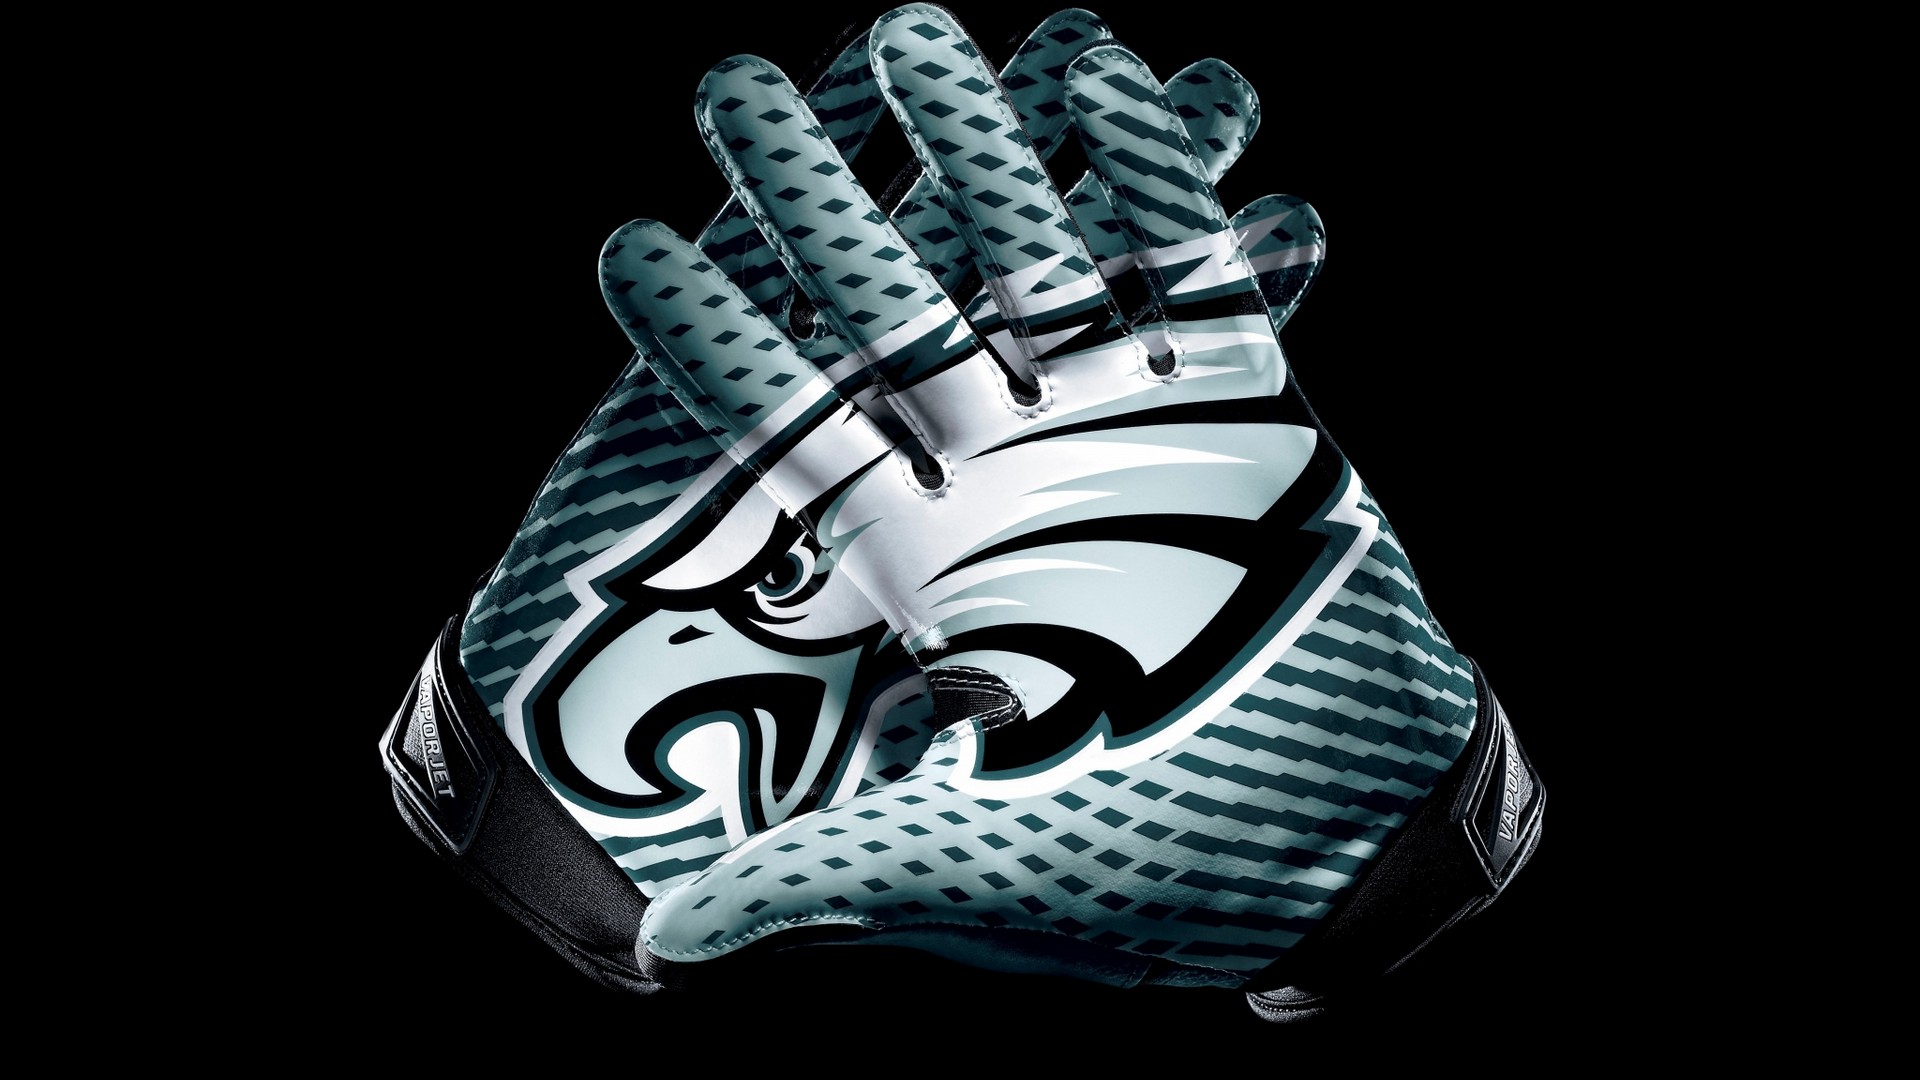 Windows Wallpaper Philadelphia Eagles With Resolution 1920X1080 pixel. You can make this wallpaper for your Mac or Windows Desktop Background, iPhone, Android or Tablet and another Smartphone device for free